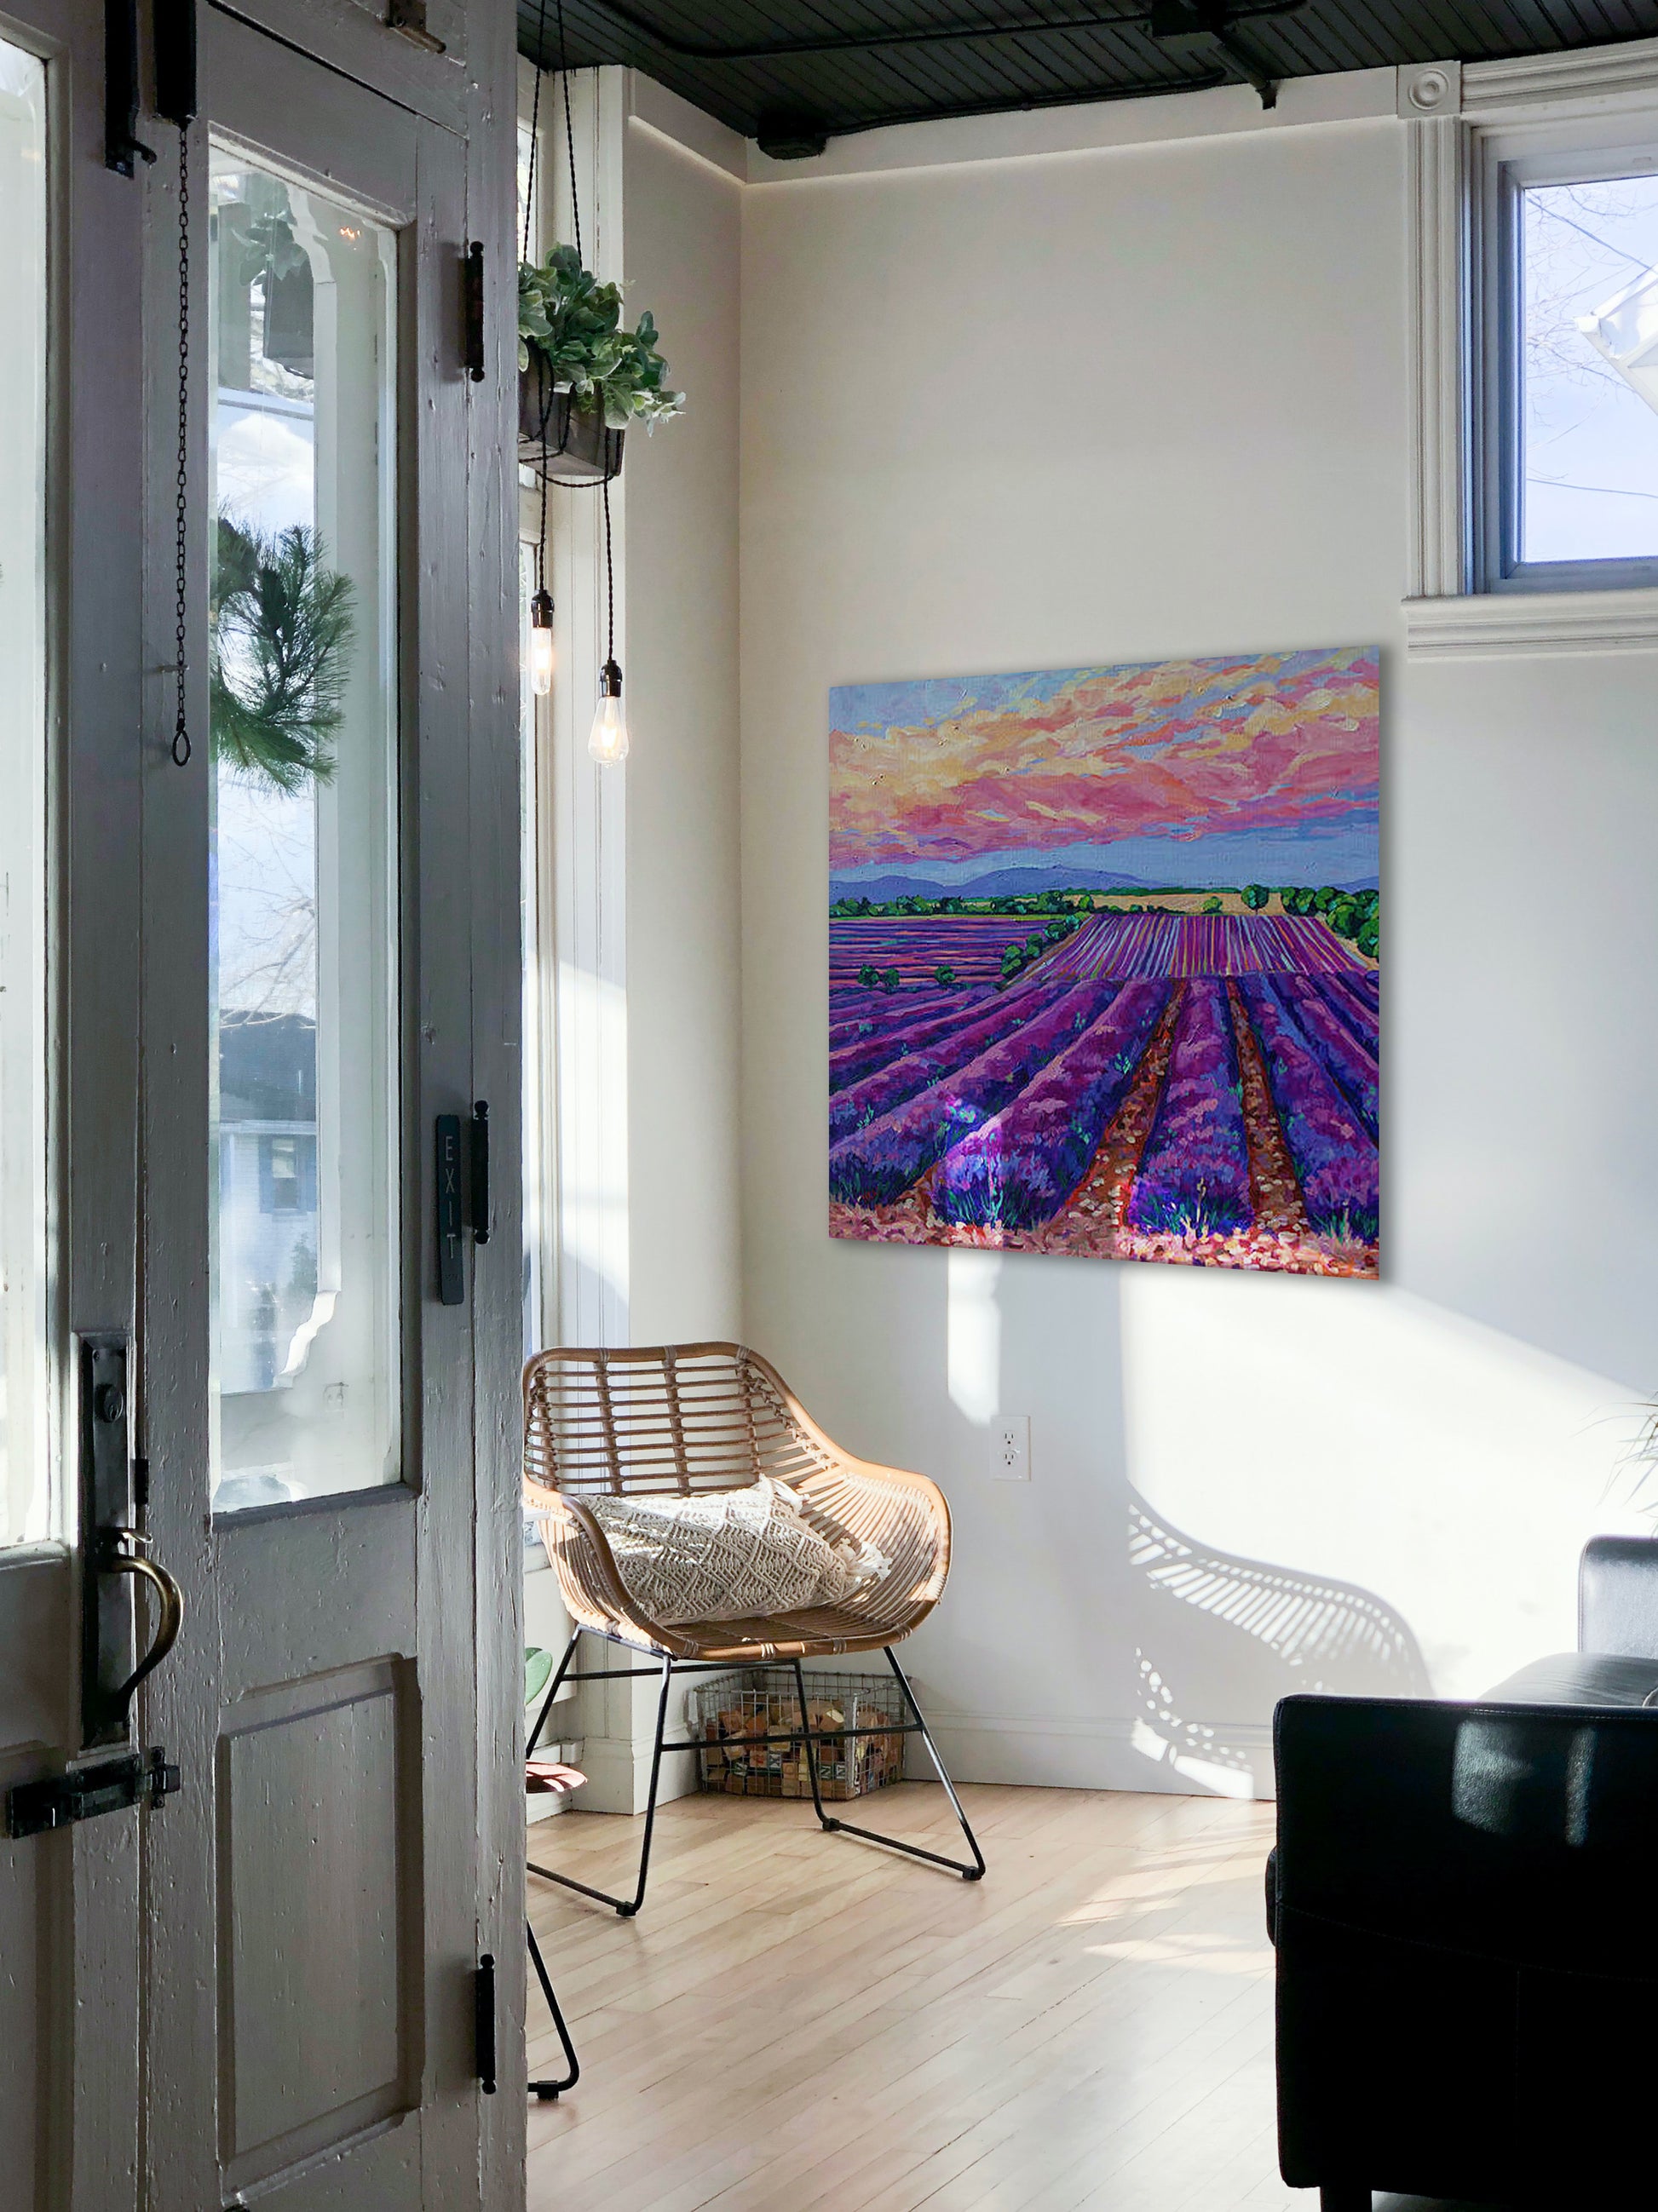 Entry way to house with beautiful painting of purple lavender fields